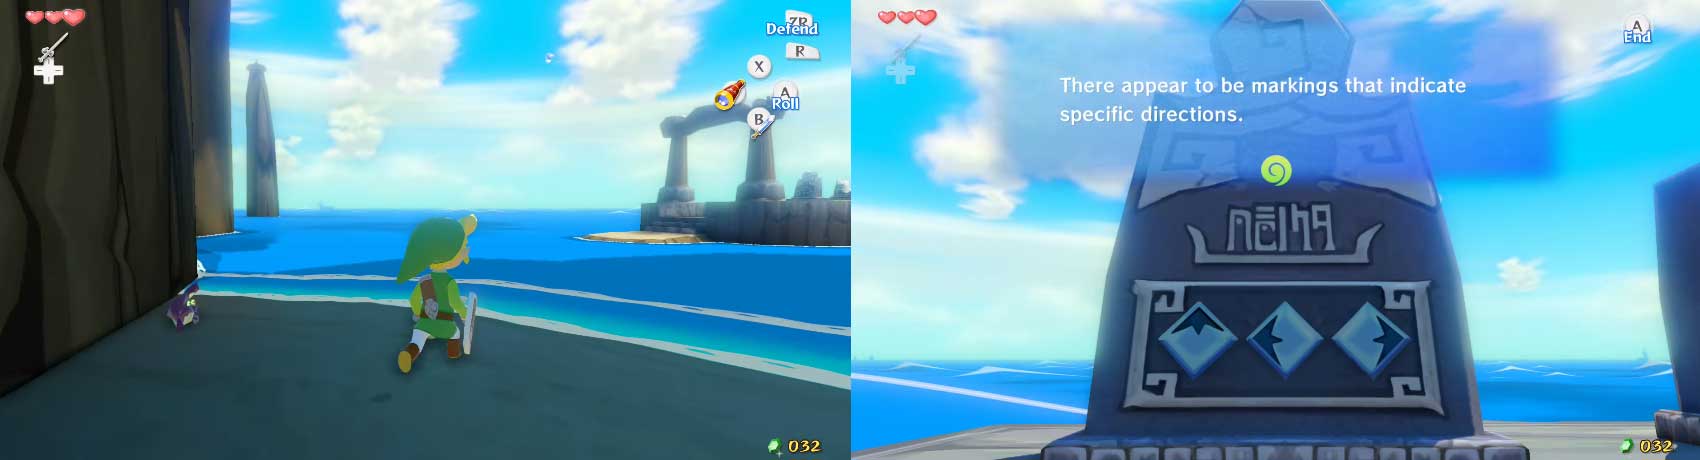 Since you have the Wind Waker, it is time to make use of the shrine behind the island. In front of you is a tunnel; follow it until you reach the coast behind the island. From there, you should be able to spot a tinier island. Swim to it and examine the un-fragmented stone tablet on the left.